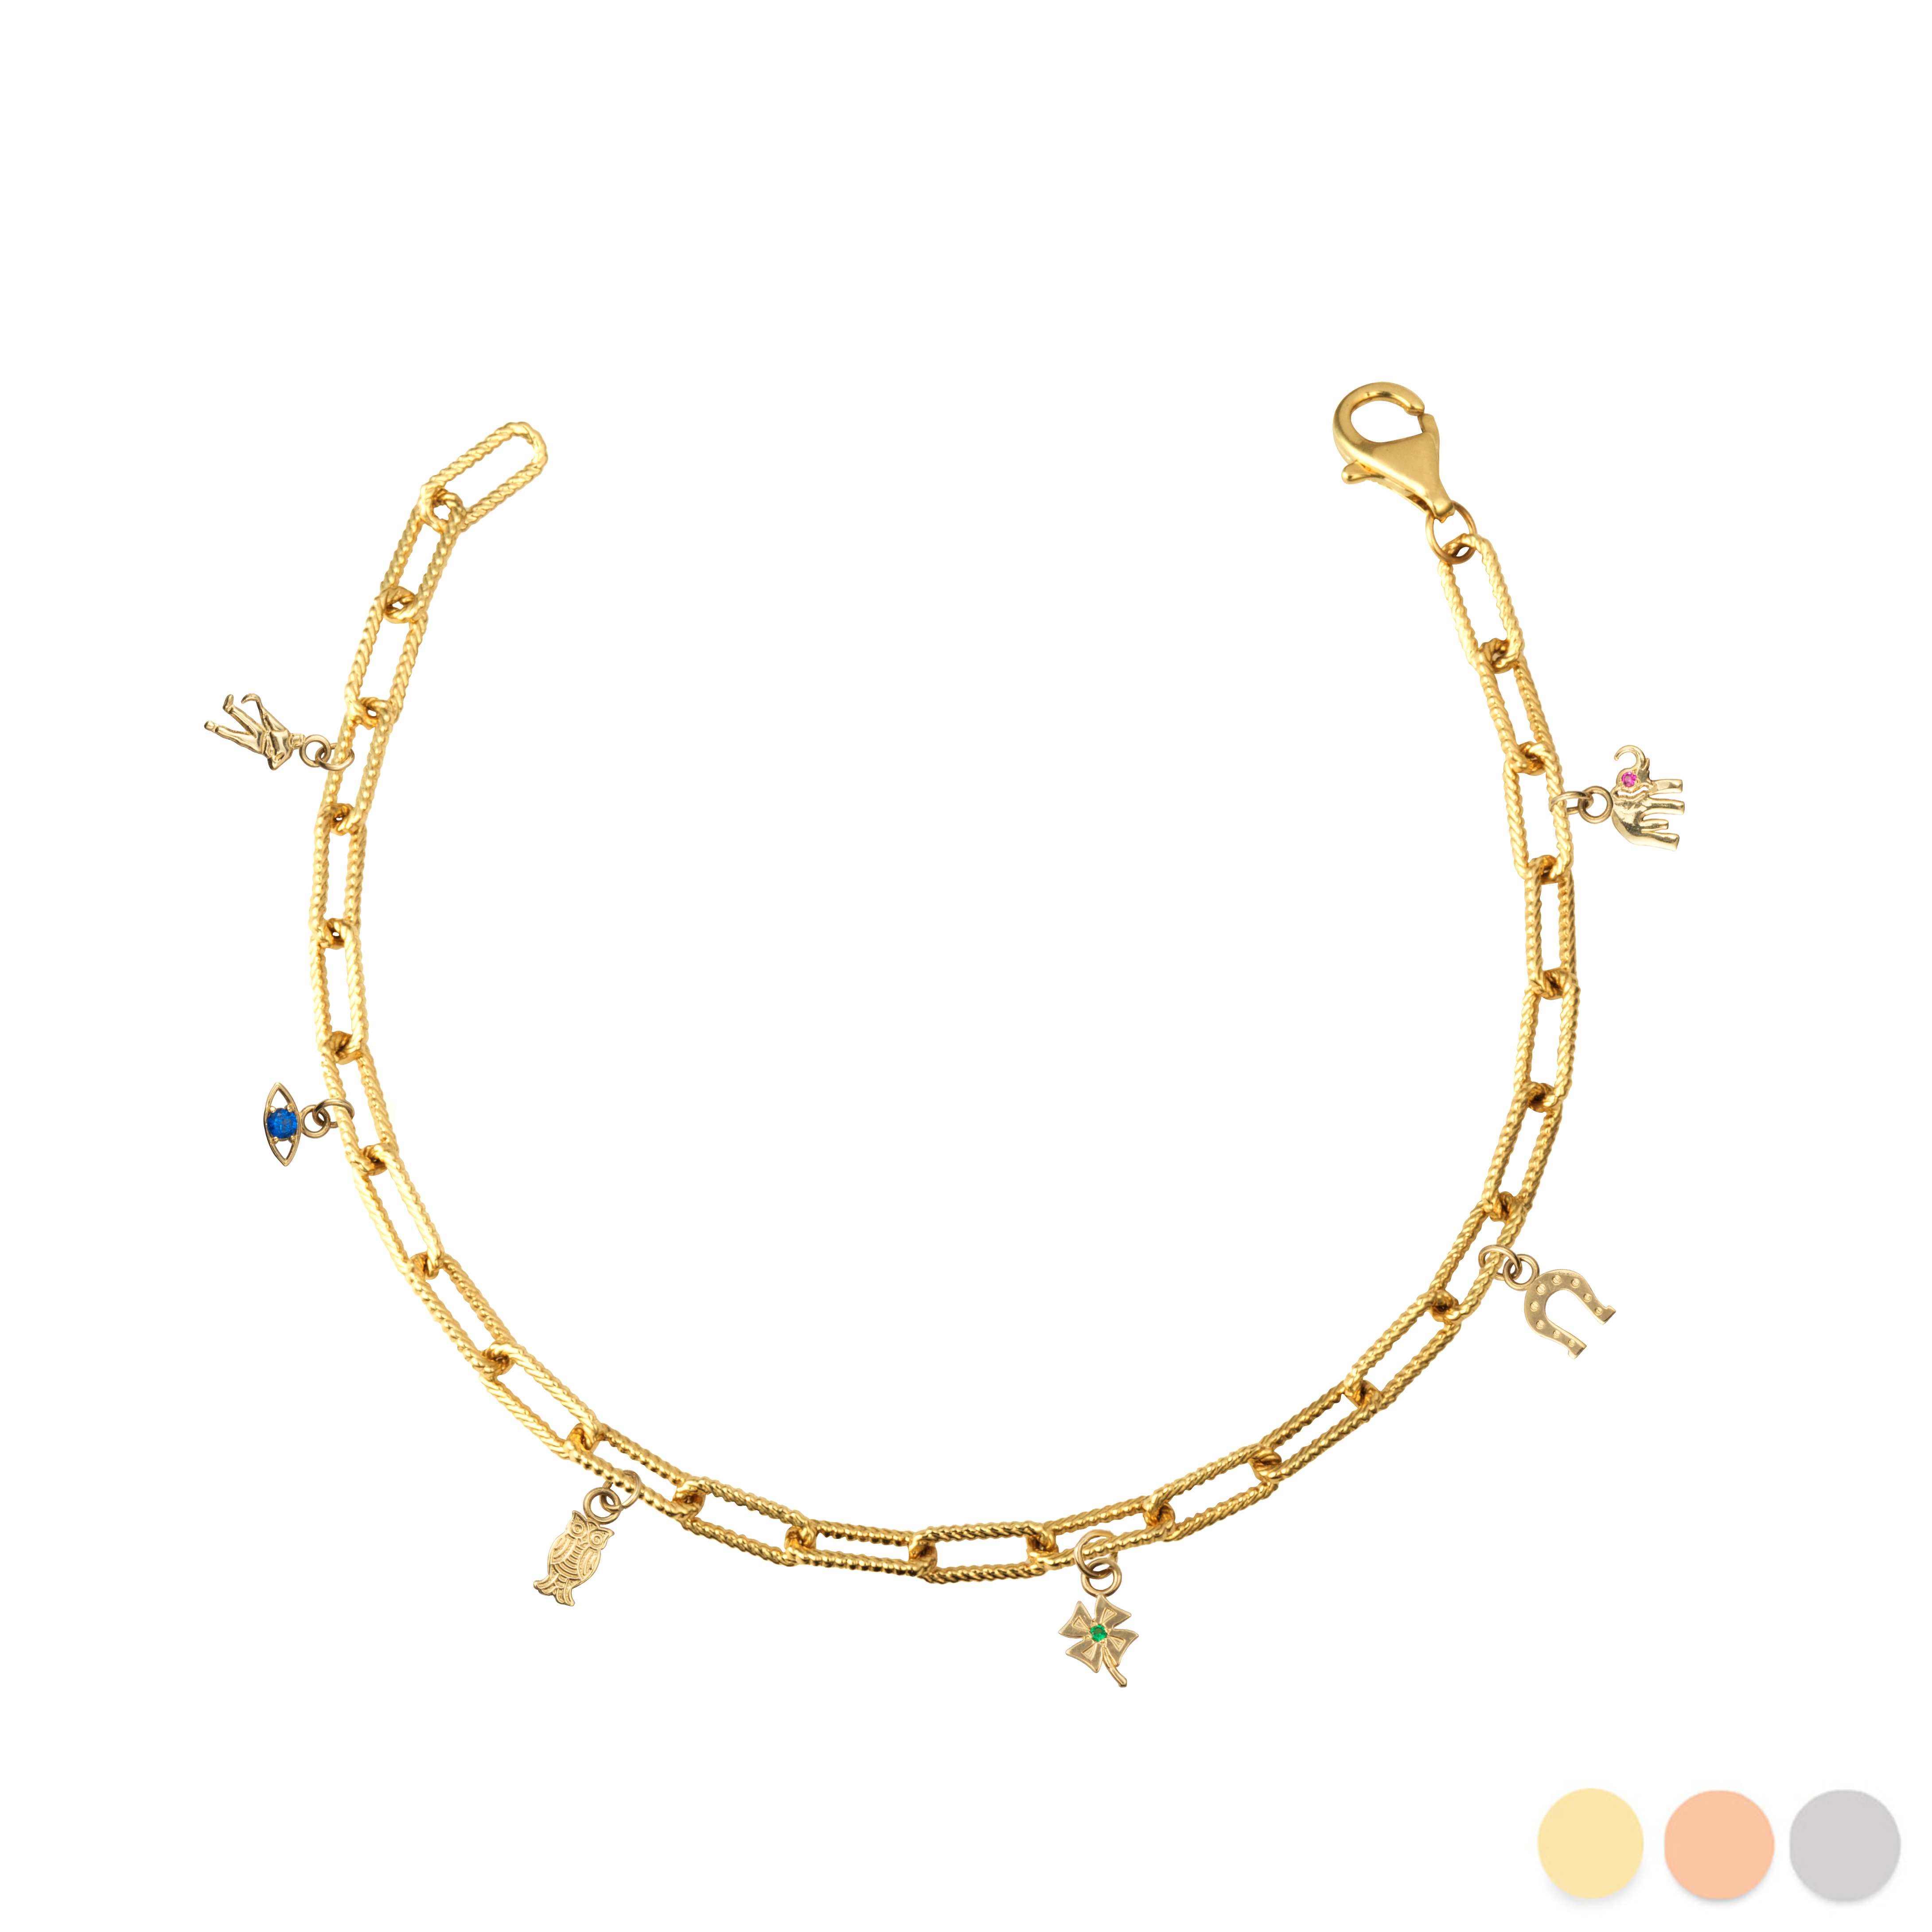 Louis Vuitton 2021 SS Blooming strass necklace (M68374) | Necklace, Louis  vuitton, Gold tone metal